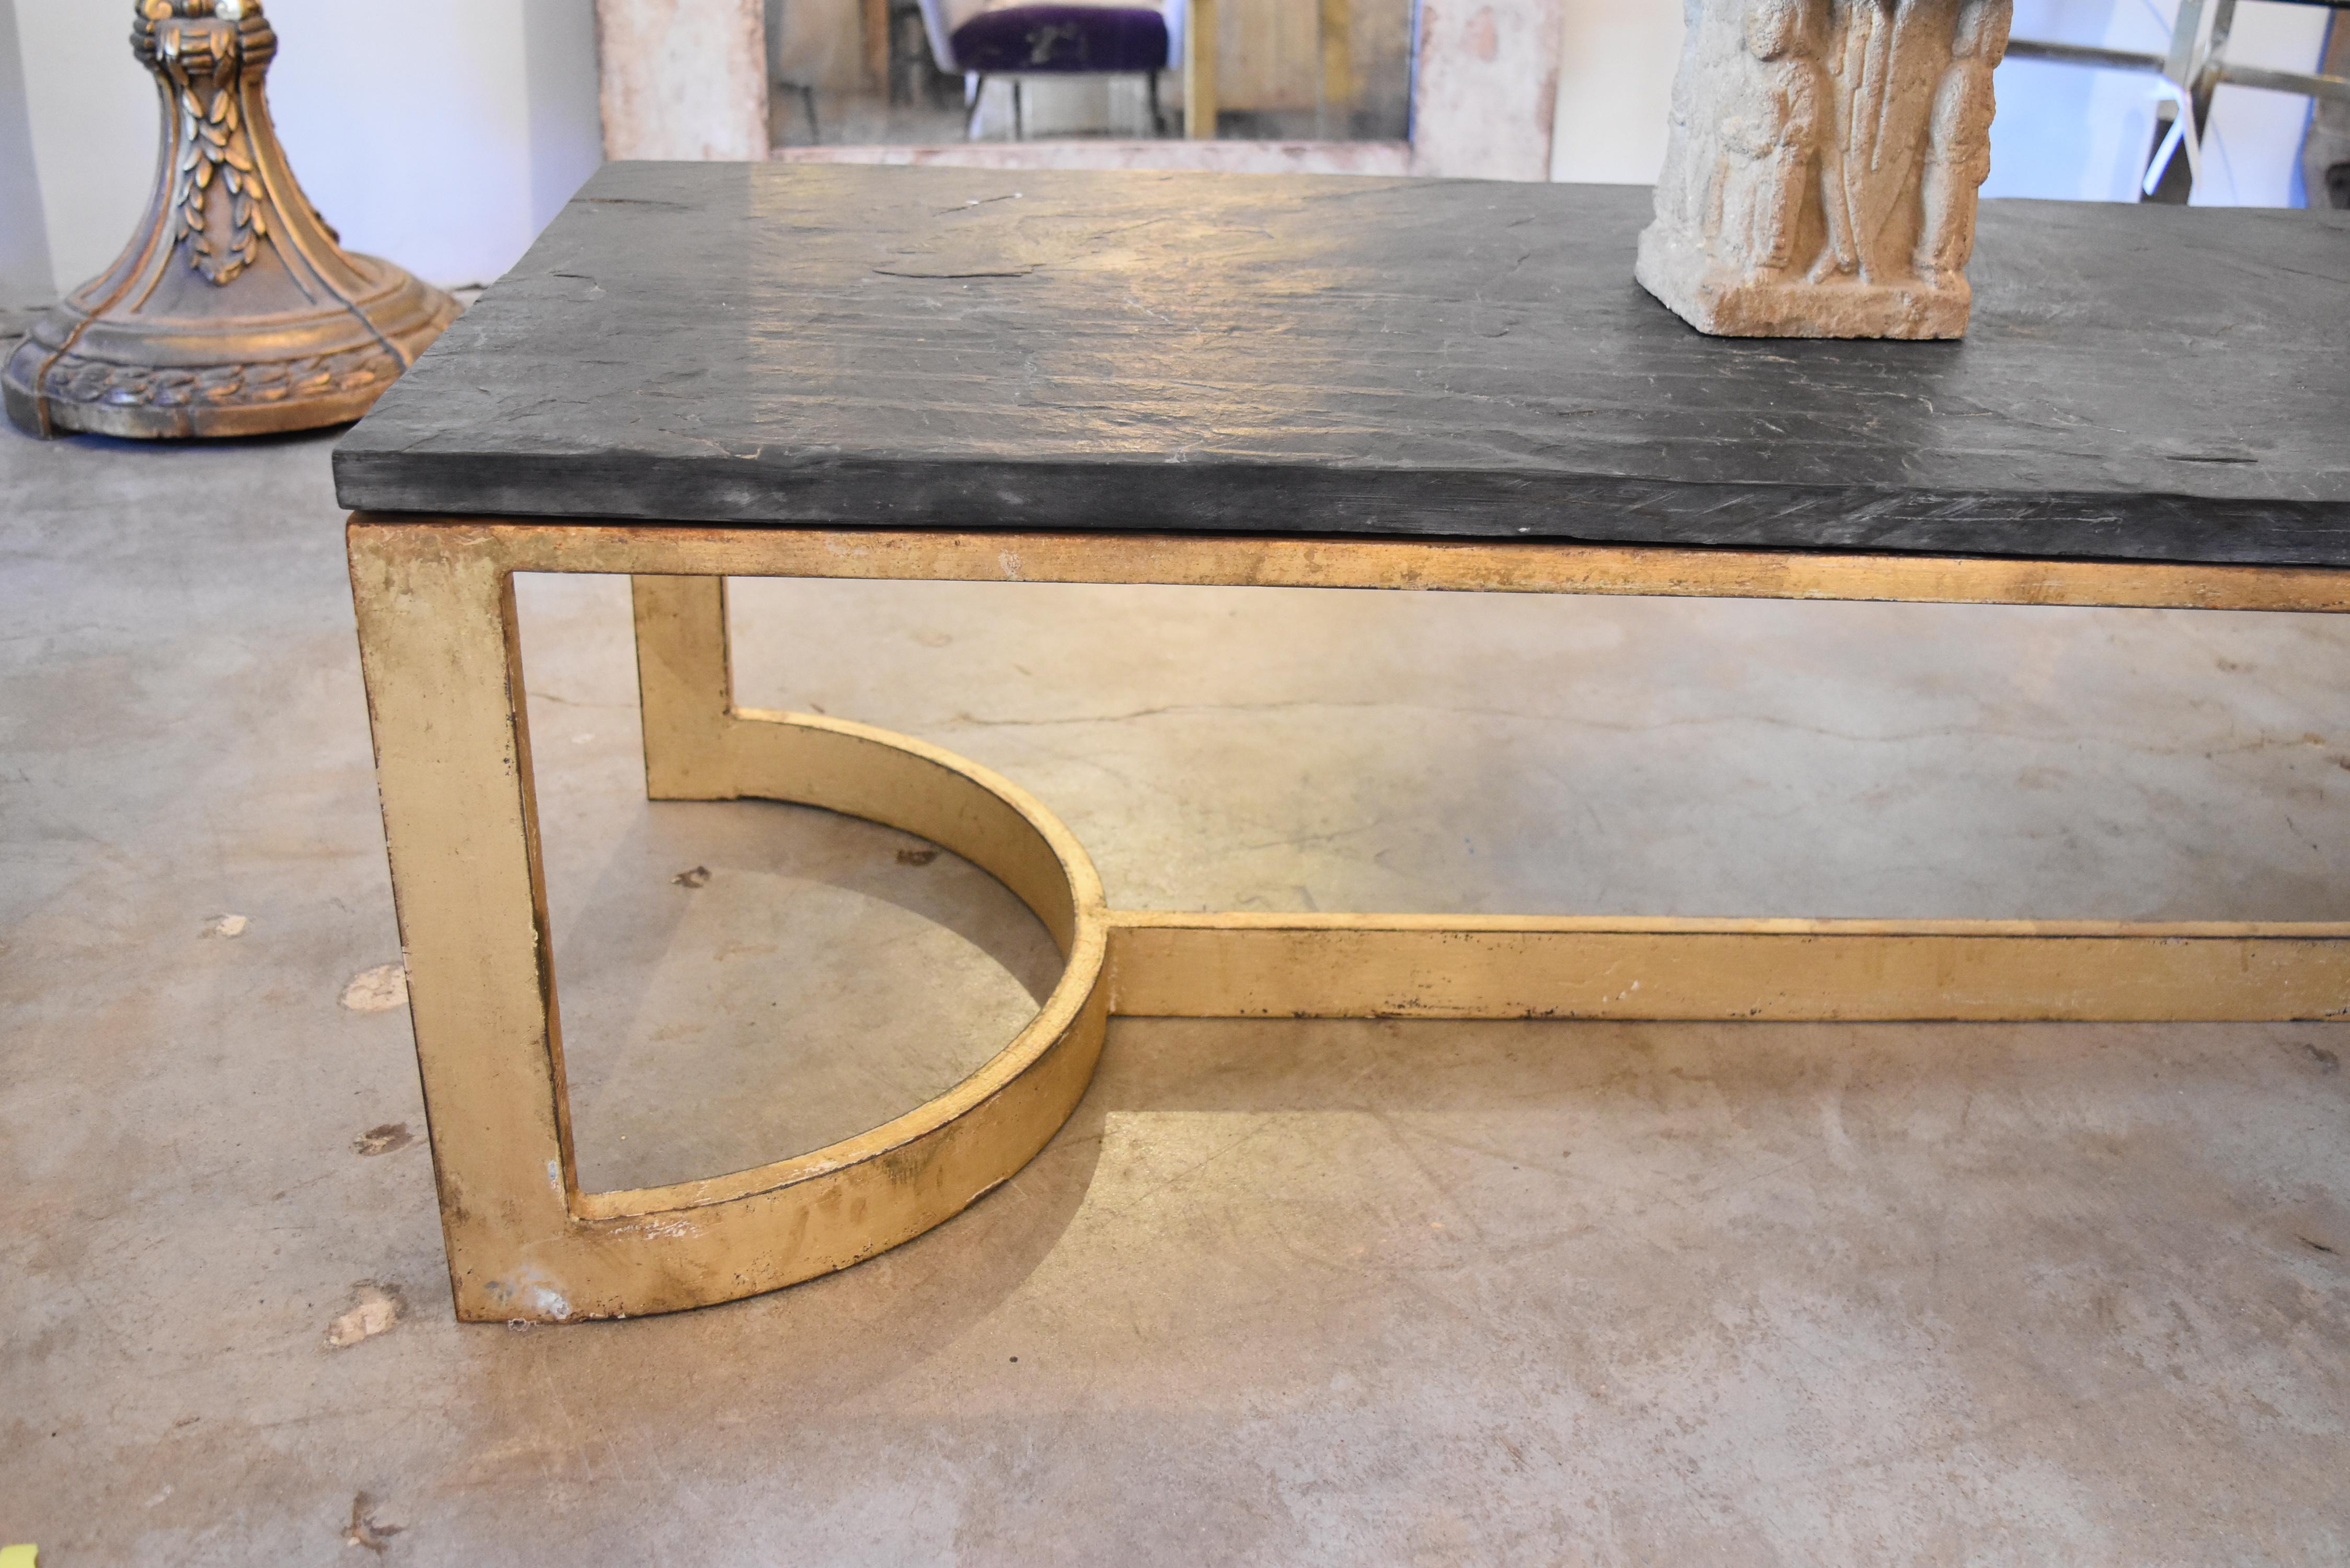 Spanish Black and Gold Antica Collection Fabricated Steel Table with Thick Slate Top